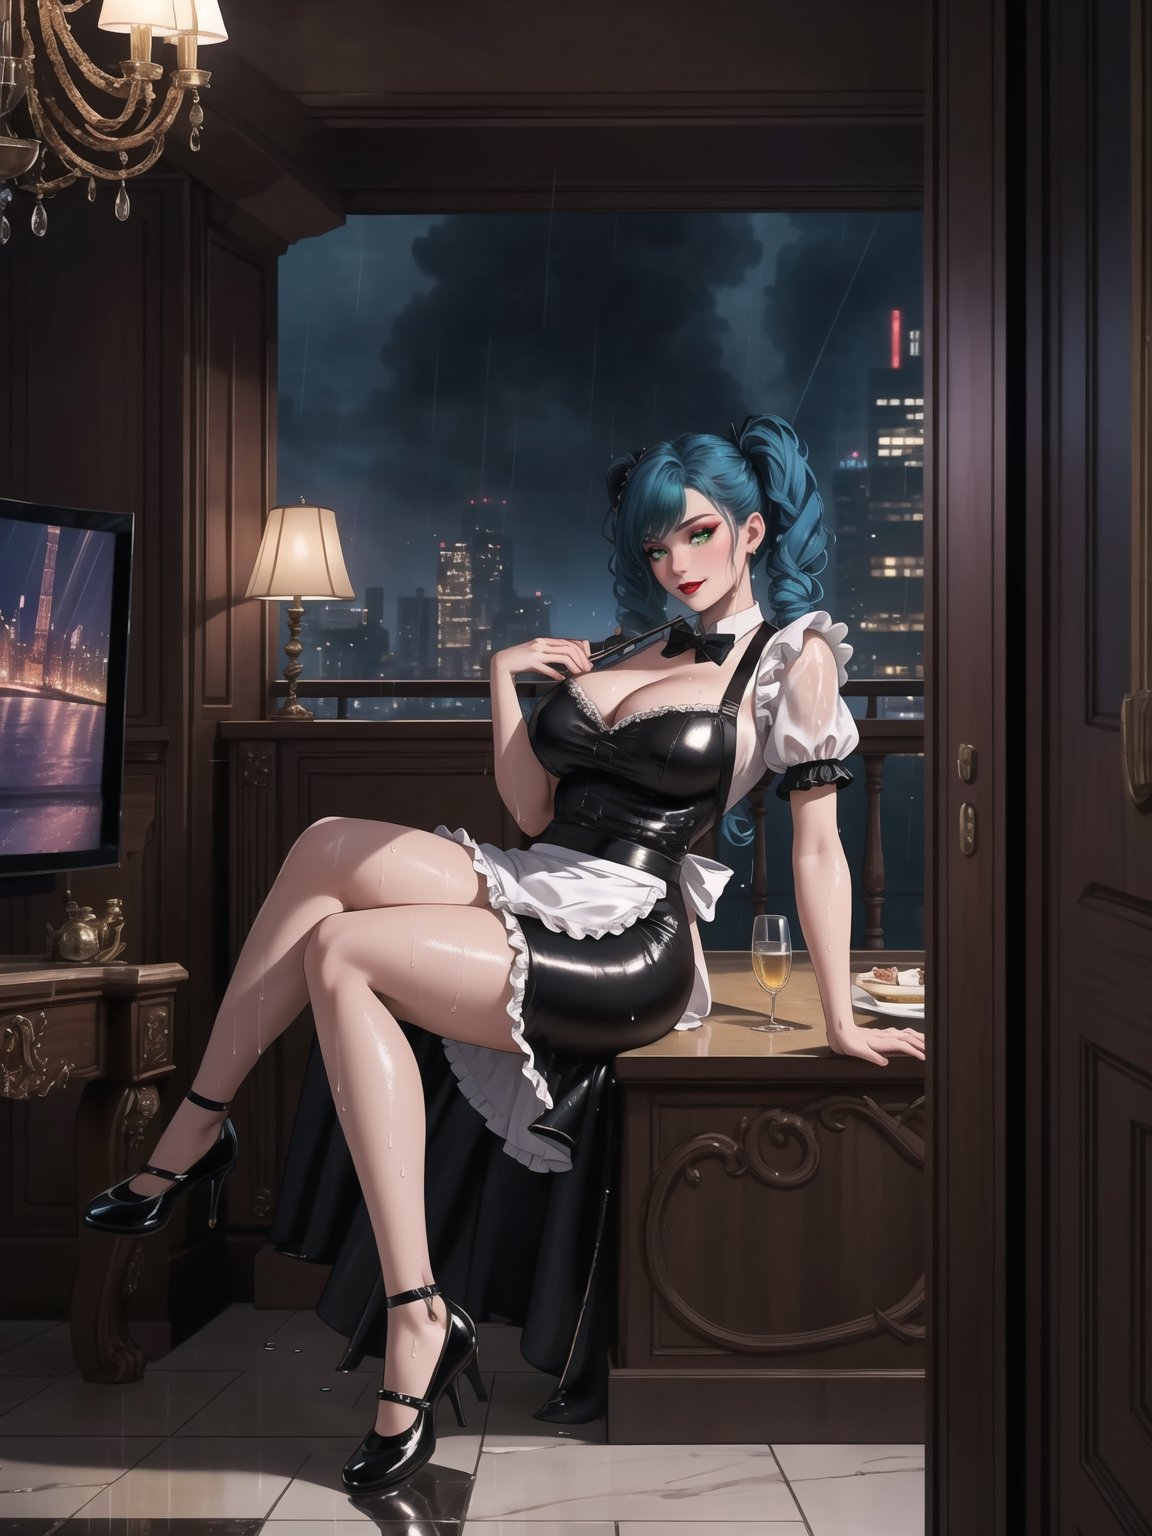 High resolution in 4K, inspired by urban surrealism with touches of classic elegance. | The housekeeper, a beautiful 30-year-old woman, works boldly and sensually. Dressed in a black maid outfit with a white apron, lycra stockings, and black flat shoes, she stares directly at the viewer with her long, blue hair tied in two pigtails with metallic clips, adding a playful touch to her appearance. Her entire body and clothing are wet from water, giving a bold look to the scene. | The setting is in a large and luxurious apartment, filled with elegant furniture and marble structures. A glass dining table, a bookshelf with a 90-inch television, and a window overlooking the rainy city at night make up the scene. The housekeeper, with a bold attitude, interacts with imposing structures, leaning on them and adopting sensual poses, creating a provocative and unique dynamic. | A 30-year-old housekeeper with a blend of urban surrealism and classic elegance, working boldly and sensually in a luxurious apartment during a rainy night. | She is striking a ((sensual pose while interacting, boldly leaning on a large structure in the scene. Elegantly leaning against, it adds a unique touch to the scene.):1.3), ((Full body image)), perfect hand, fingers, hand, perfect, better_hands, More Detail,